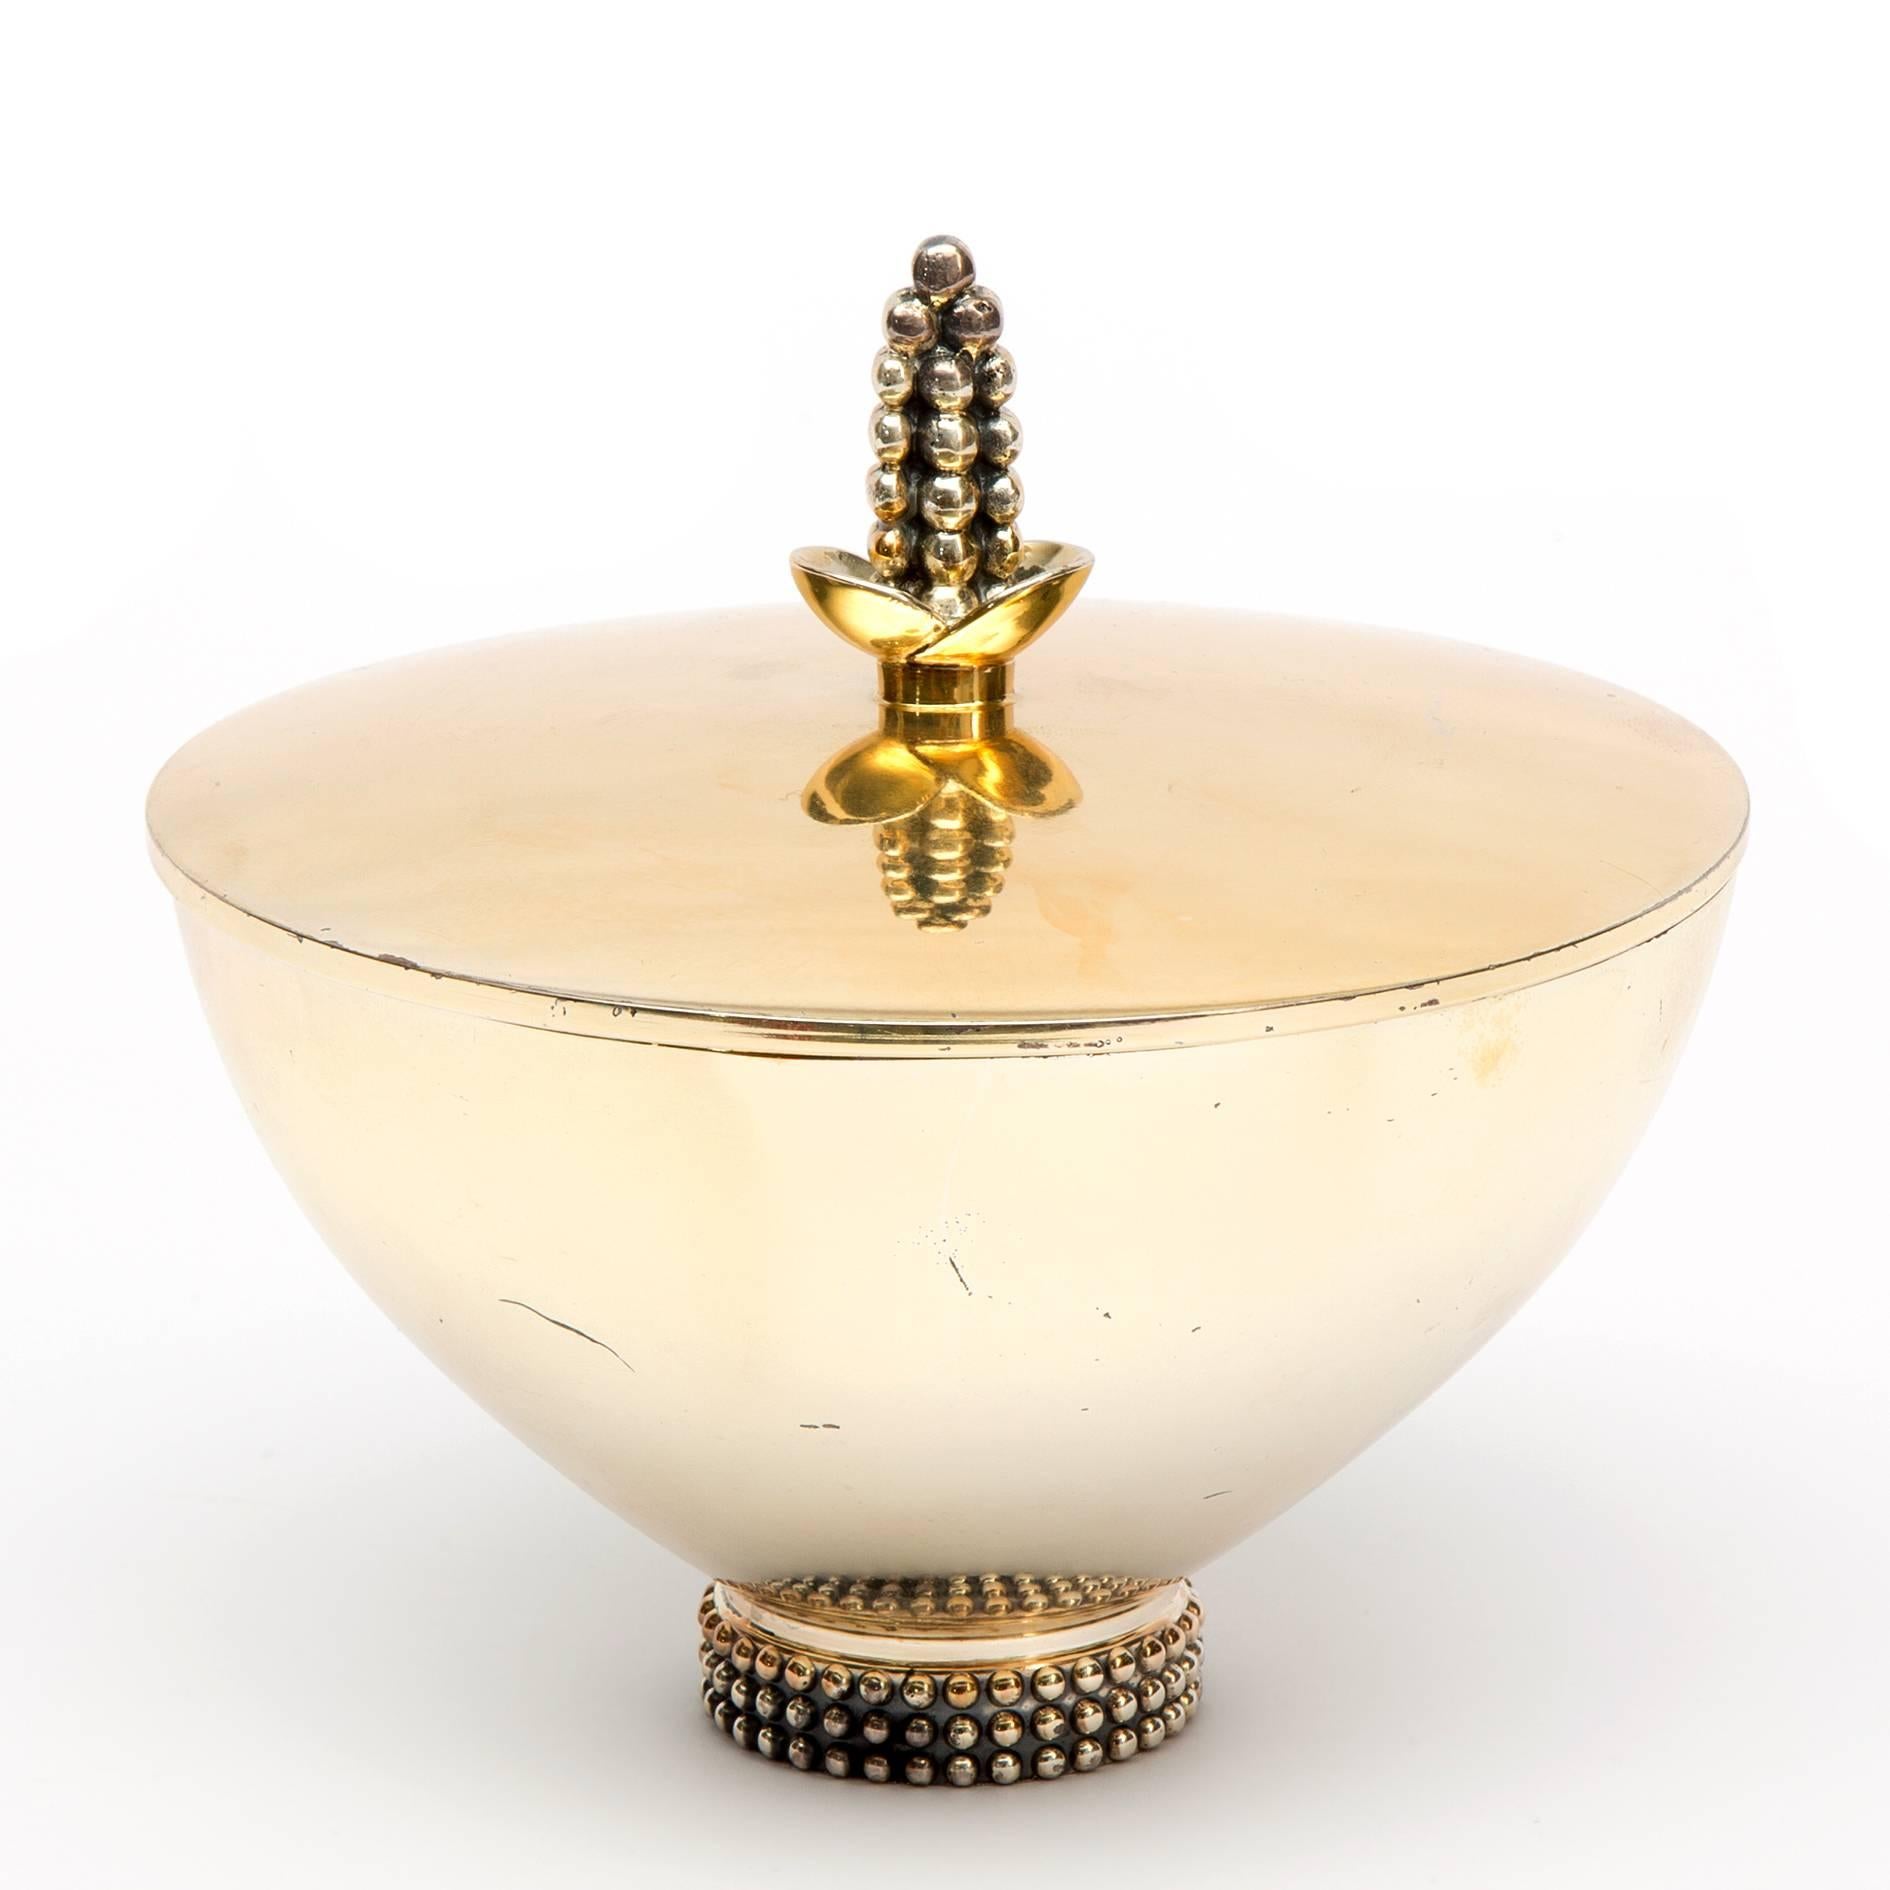 A beautiful gold plated sterling silver bonbonnière with a bunch of grapes as a lid handle, marked 925 sterling and with a standing lion. Manufactured in the 1960s by Gebrüder Deyhle, Schwäbisch Gmünd, Germany. Gebr. Deyhle was founded in 1820 and